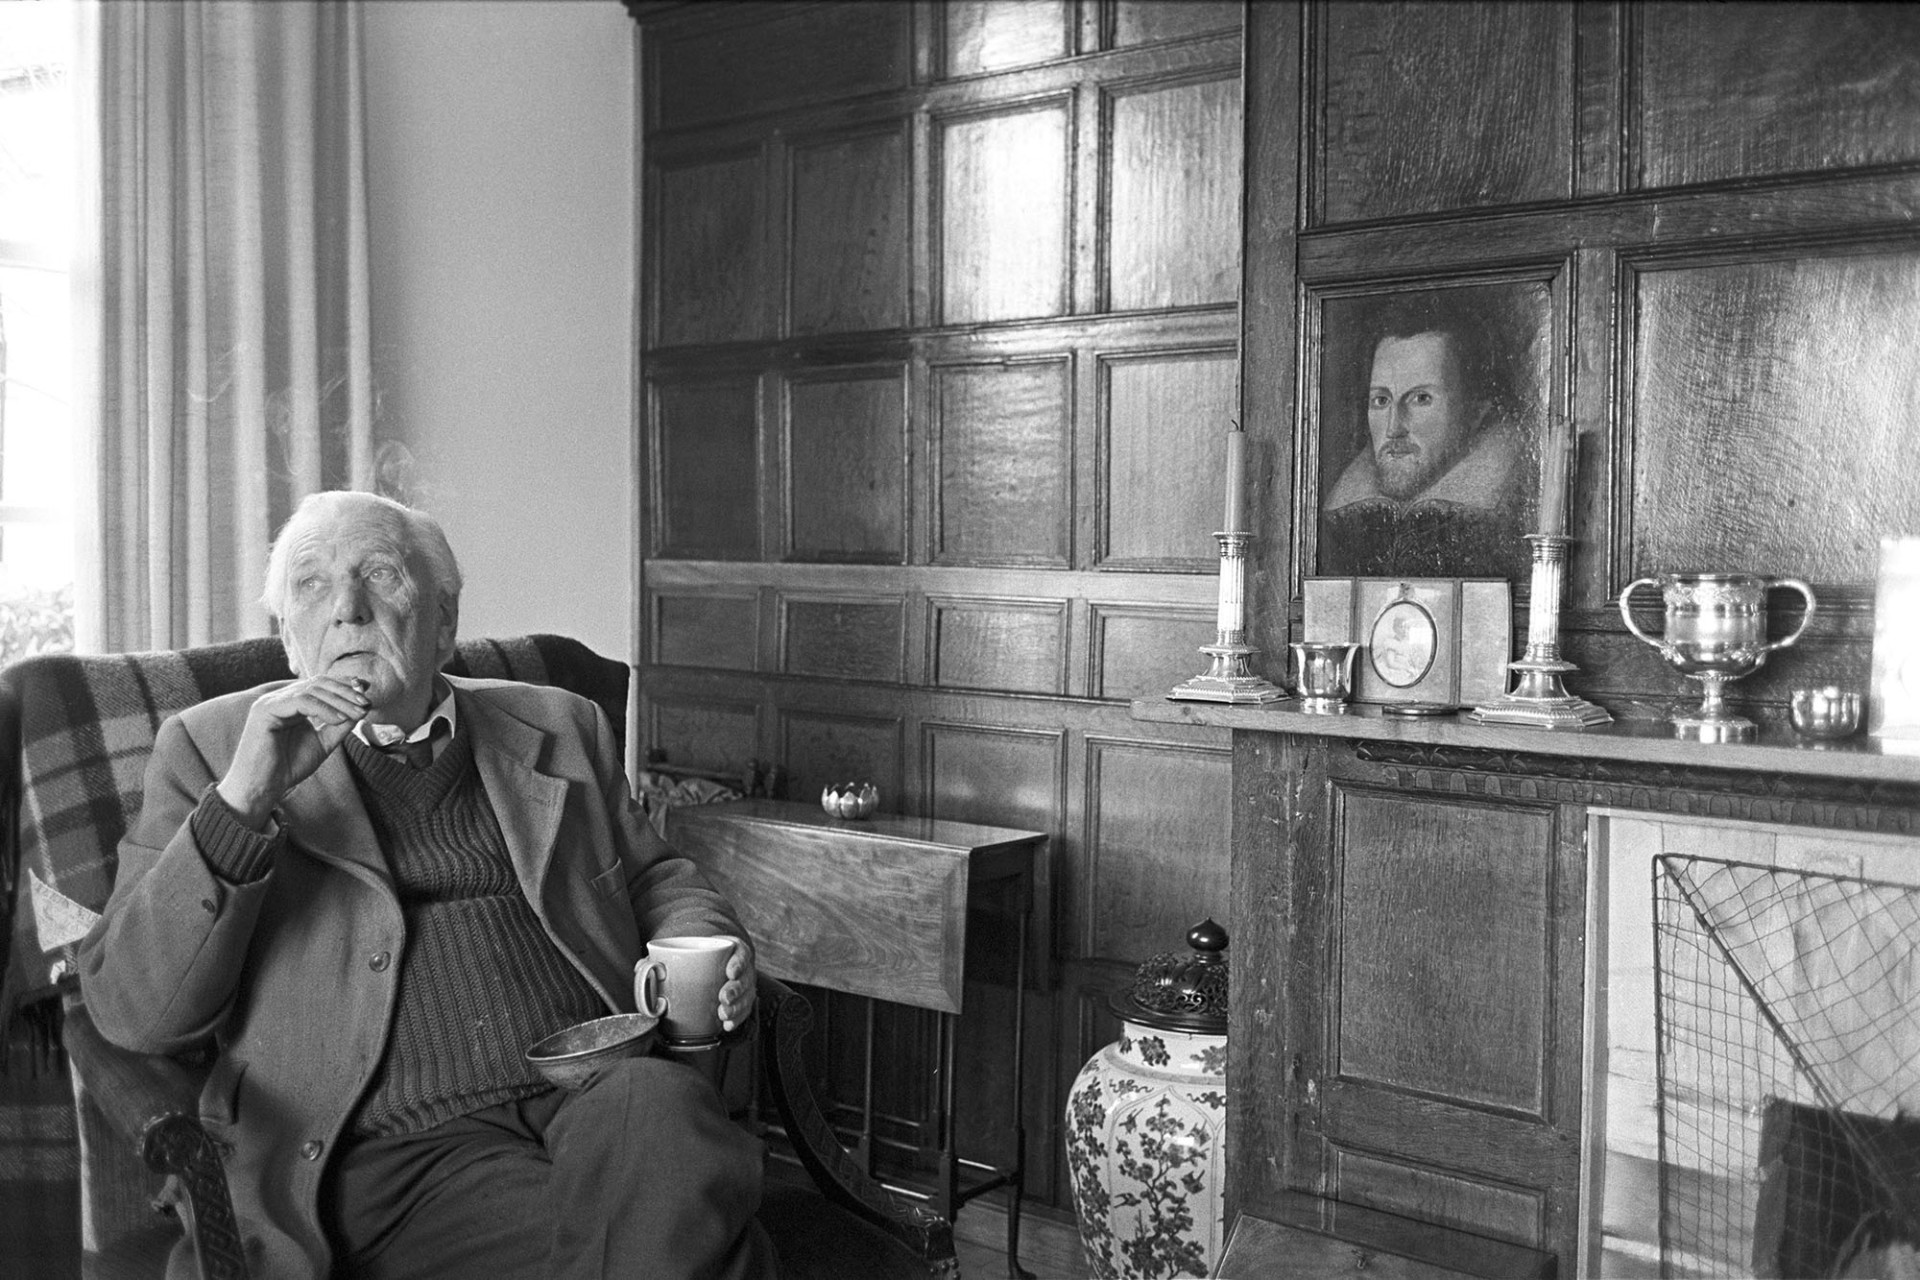 Man seated, smoking, furniture panelled screen with painting. 
[Michael Davis, a retired solicitor, sitting in a chair by a fireplace at his house in Dolton. He is smoking a cigarette and holding a mug. The room has wooden panelling, and one of the panels contains a portrait of a man. Candlesticks and silverware are on display on the mantelpiece.]